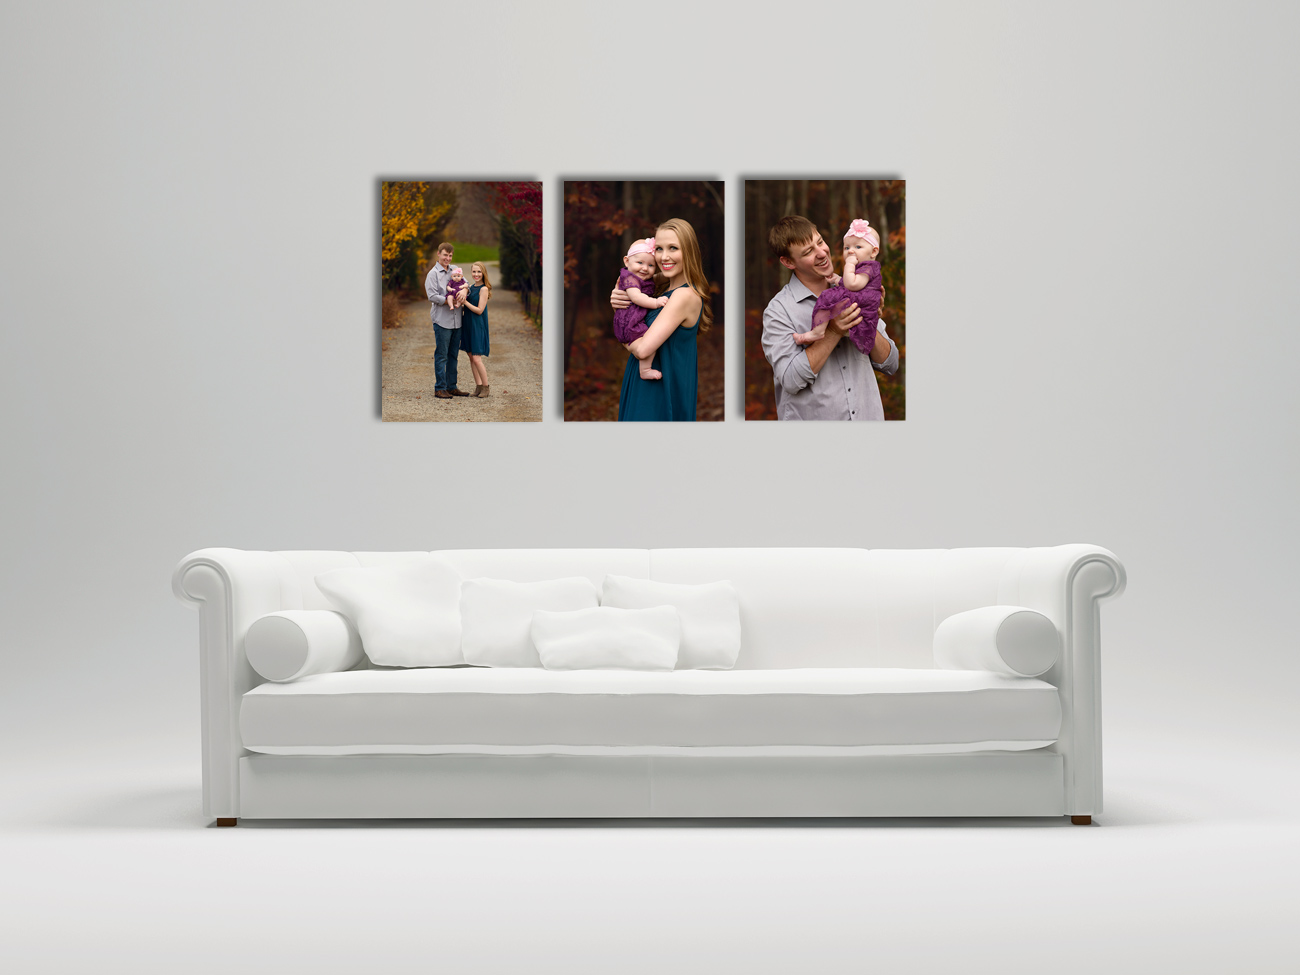 Wall photo triptych display in 16x24 size.